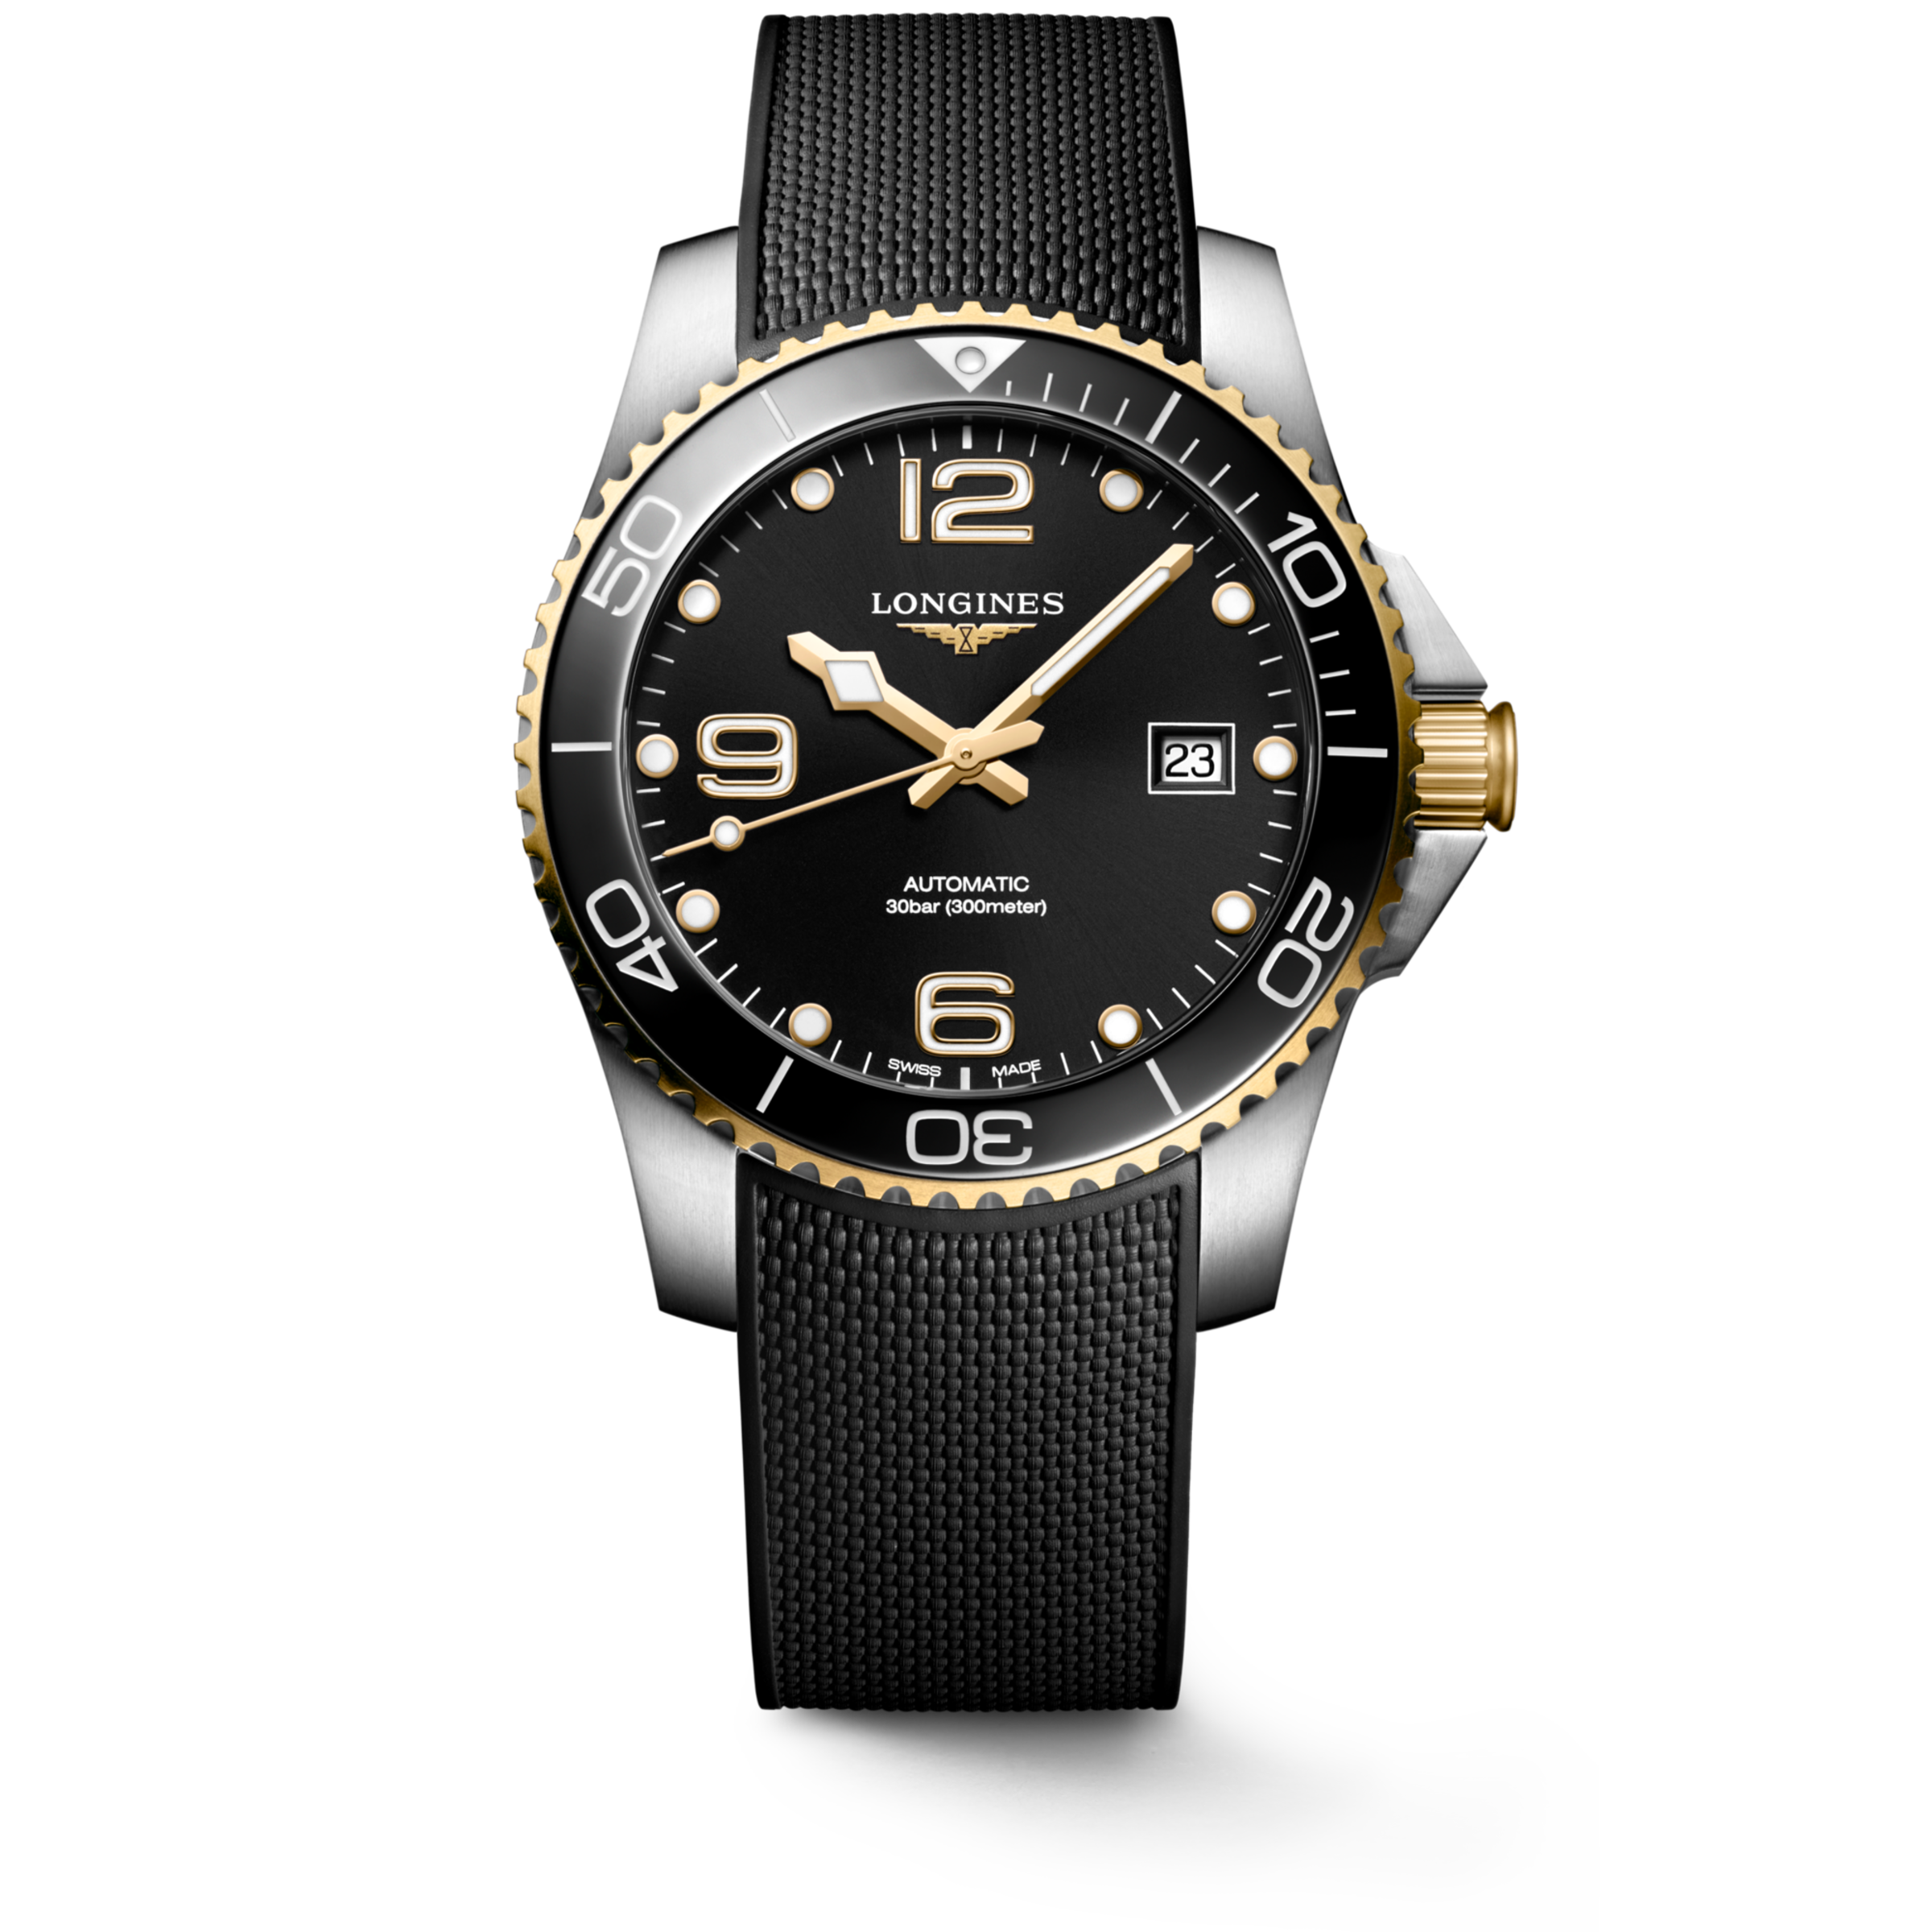 Longines HYDROCONQUEST Automatic Stainless steel and ceramic bezel Watch - L3.781.3.56.9